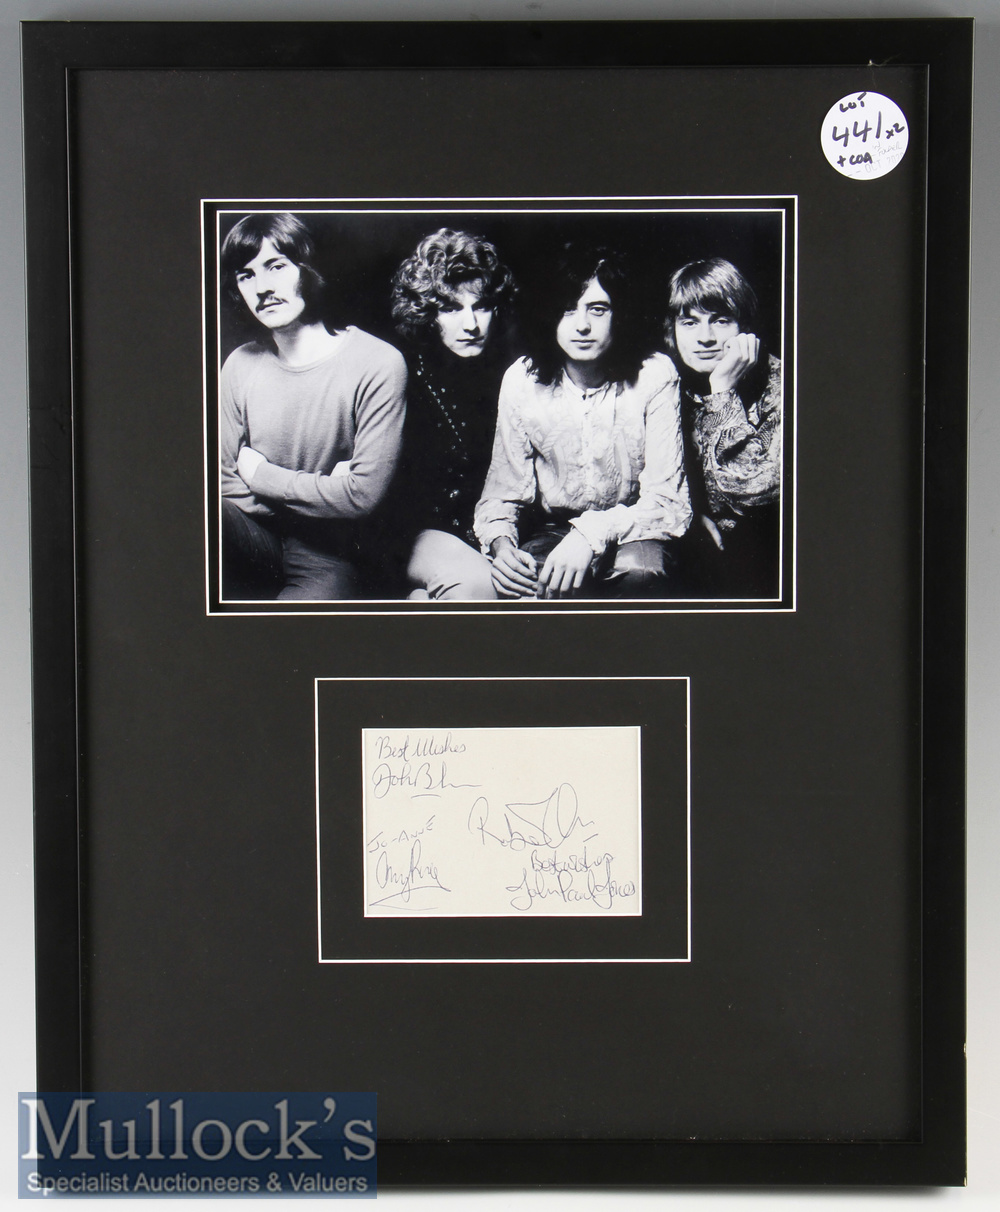 Autograph - Led Zeppelin Signed Framed Display featuring an autograph page signed by all four